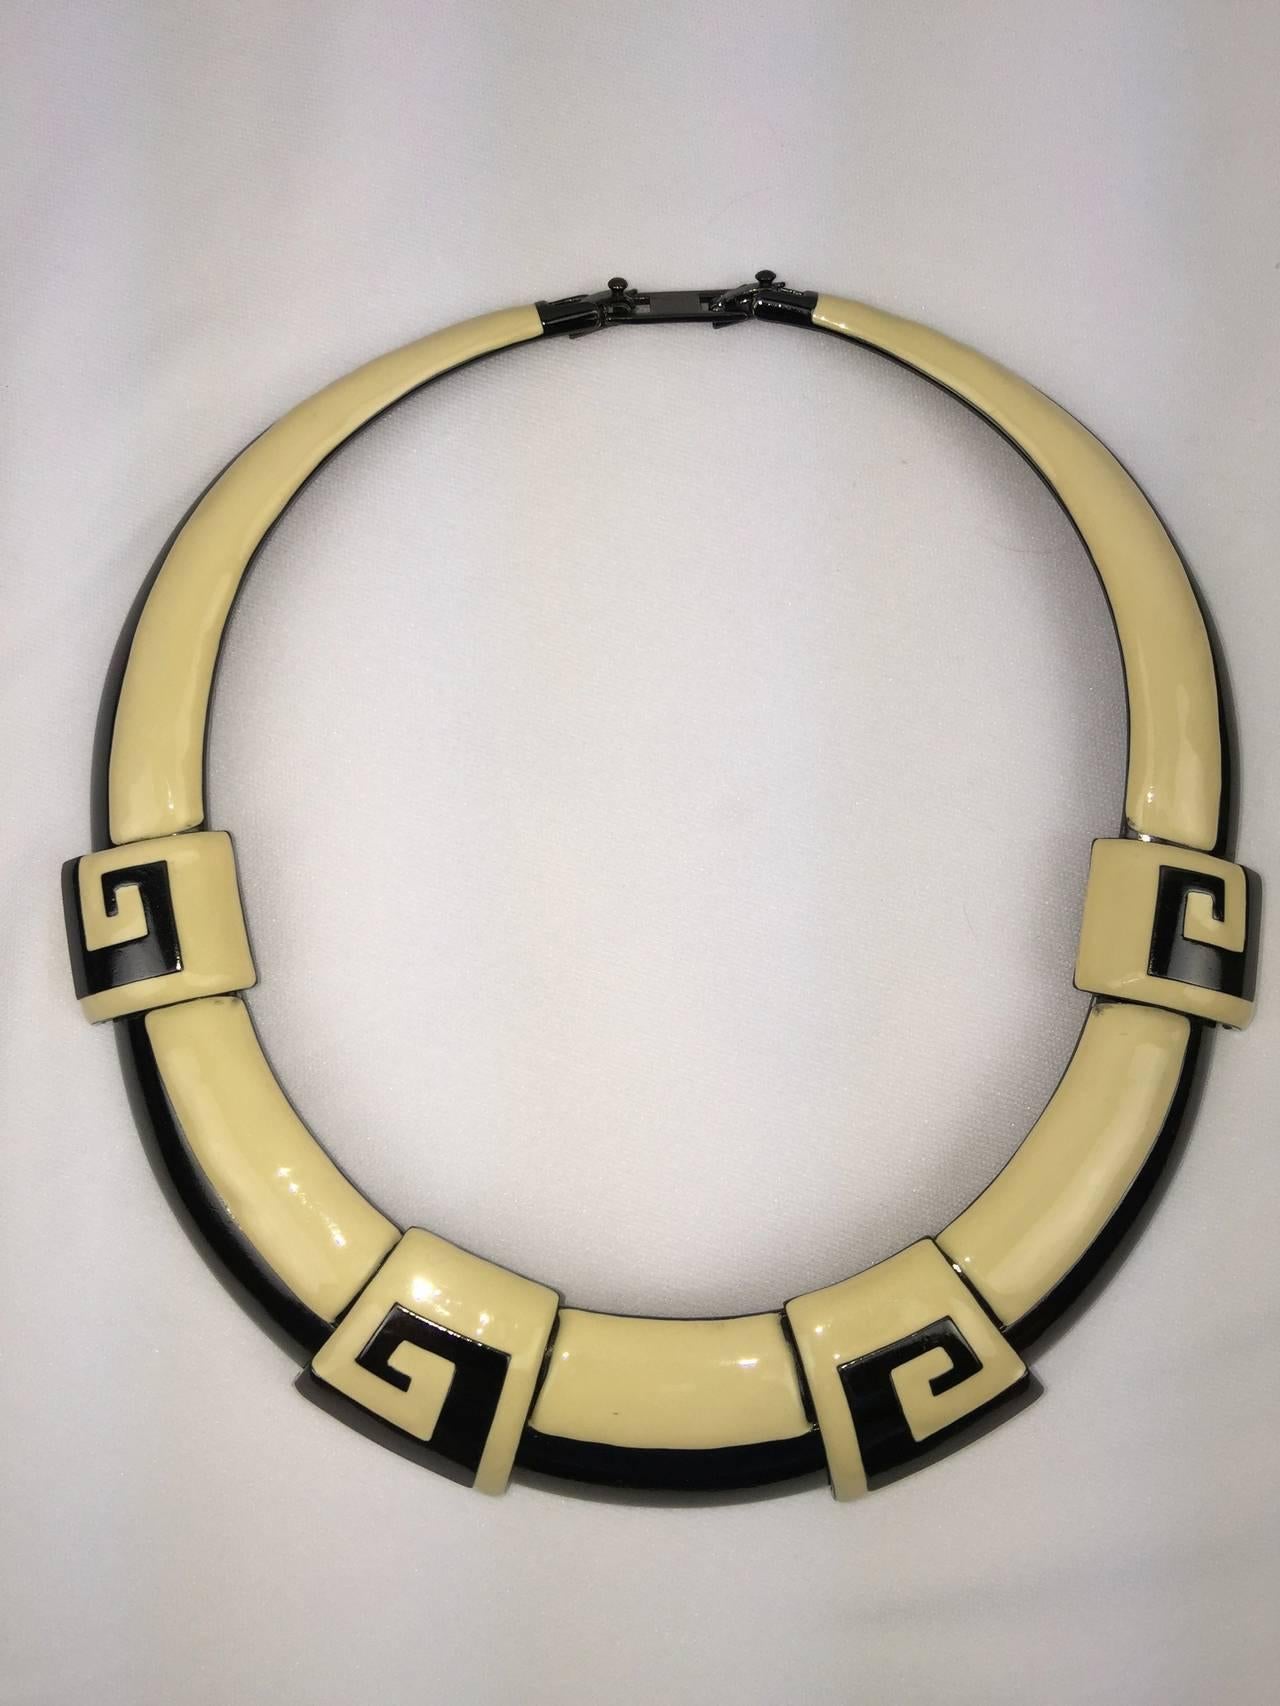 
This bold and graphic Monet set is designed for maximum but elegant impact.

Big chunky necklace and earring set in cream and black enamel.

Greek Key design.  Such clean lines.

The necklace is constructed of articulated enameled metal